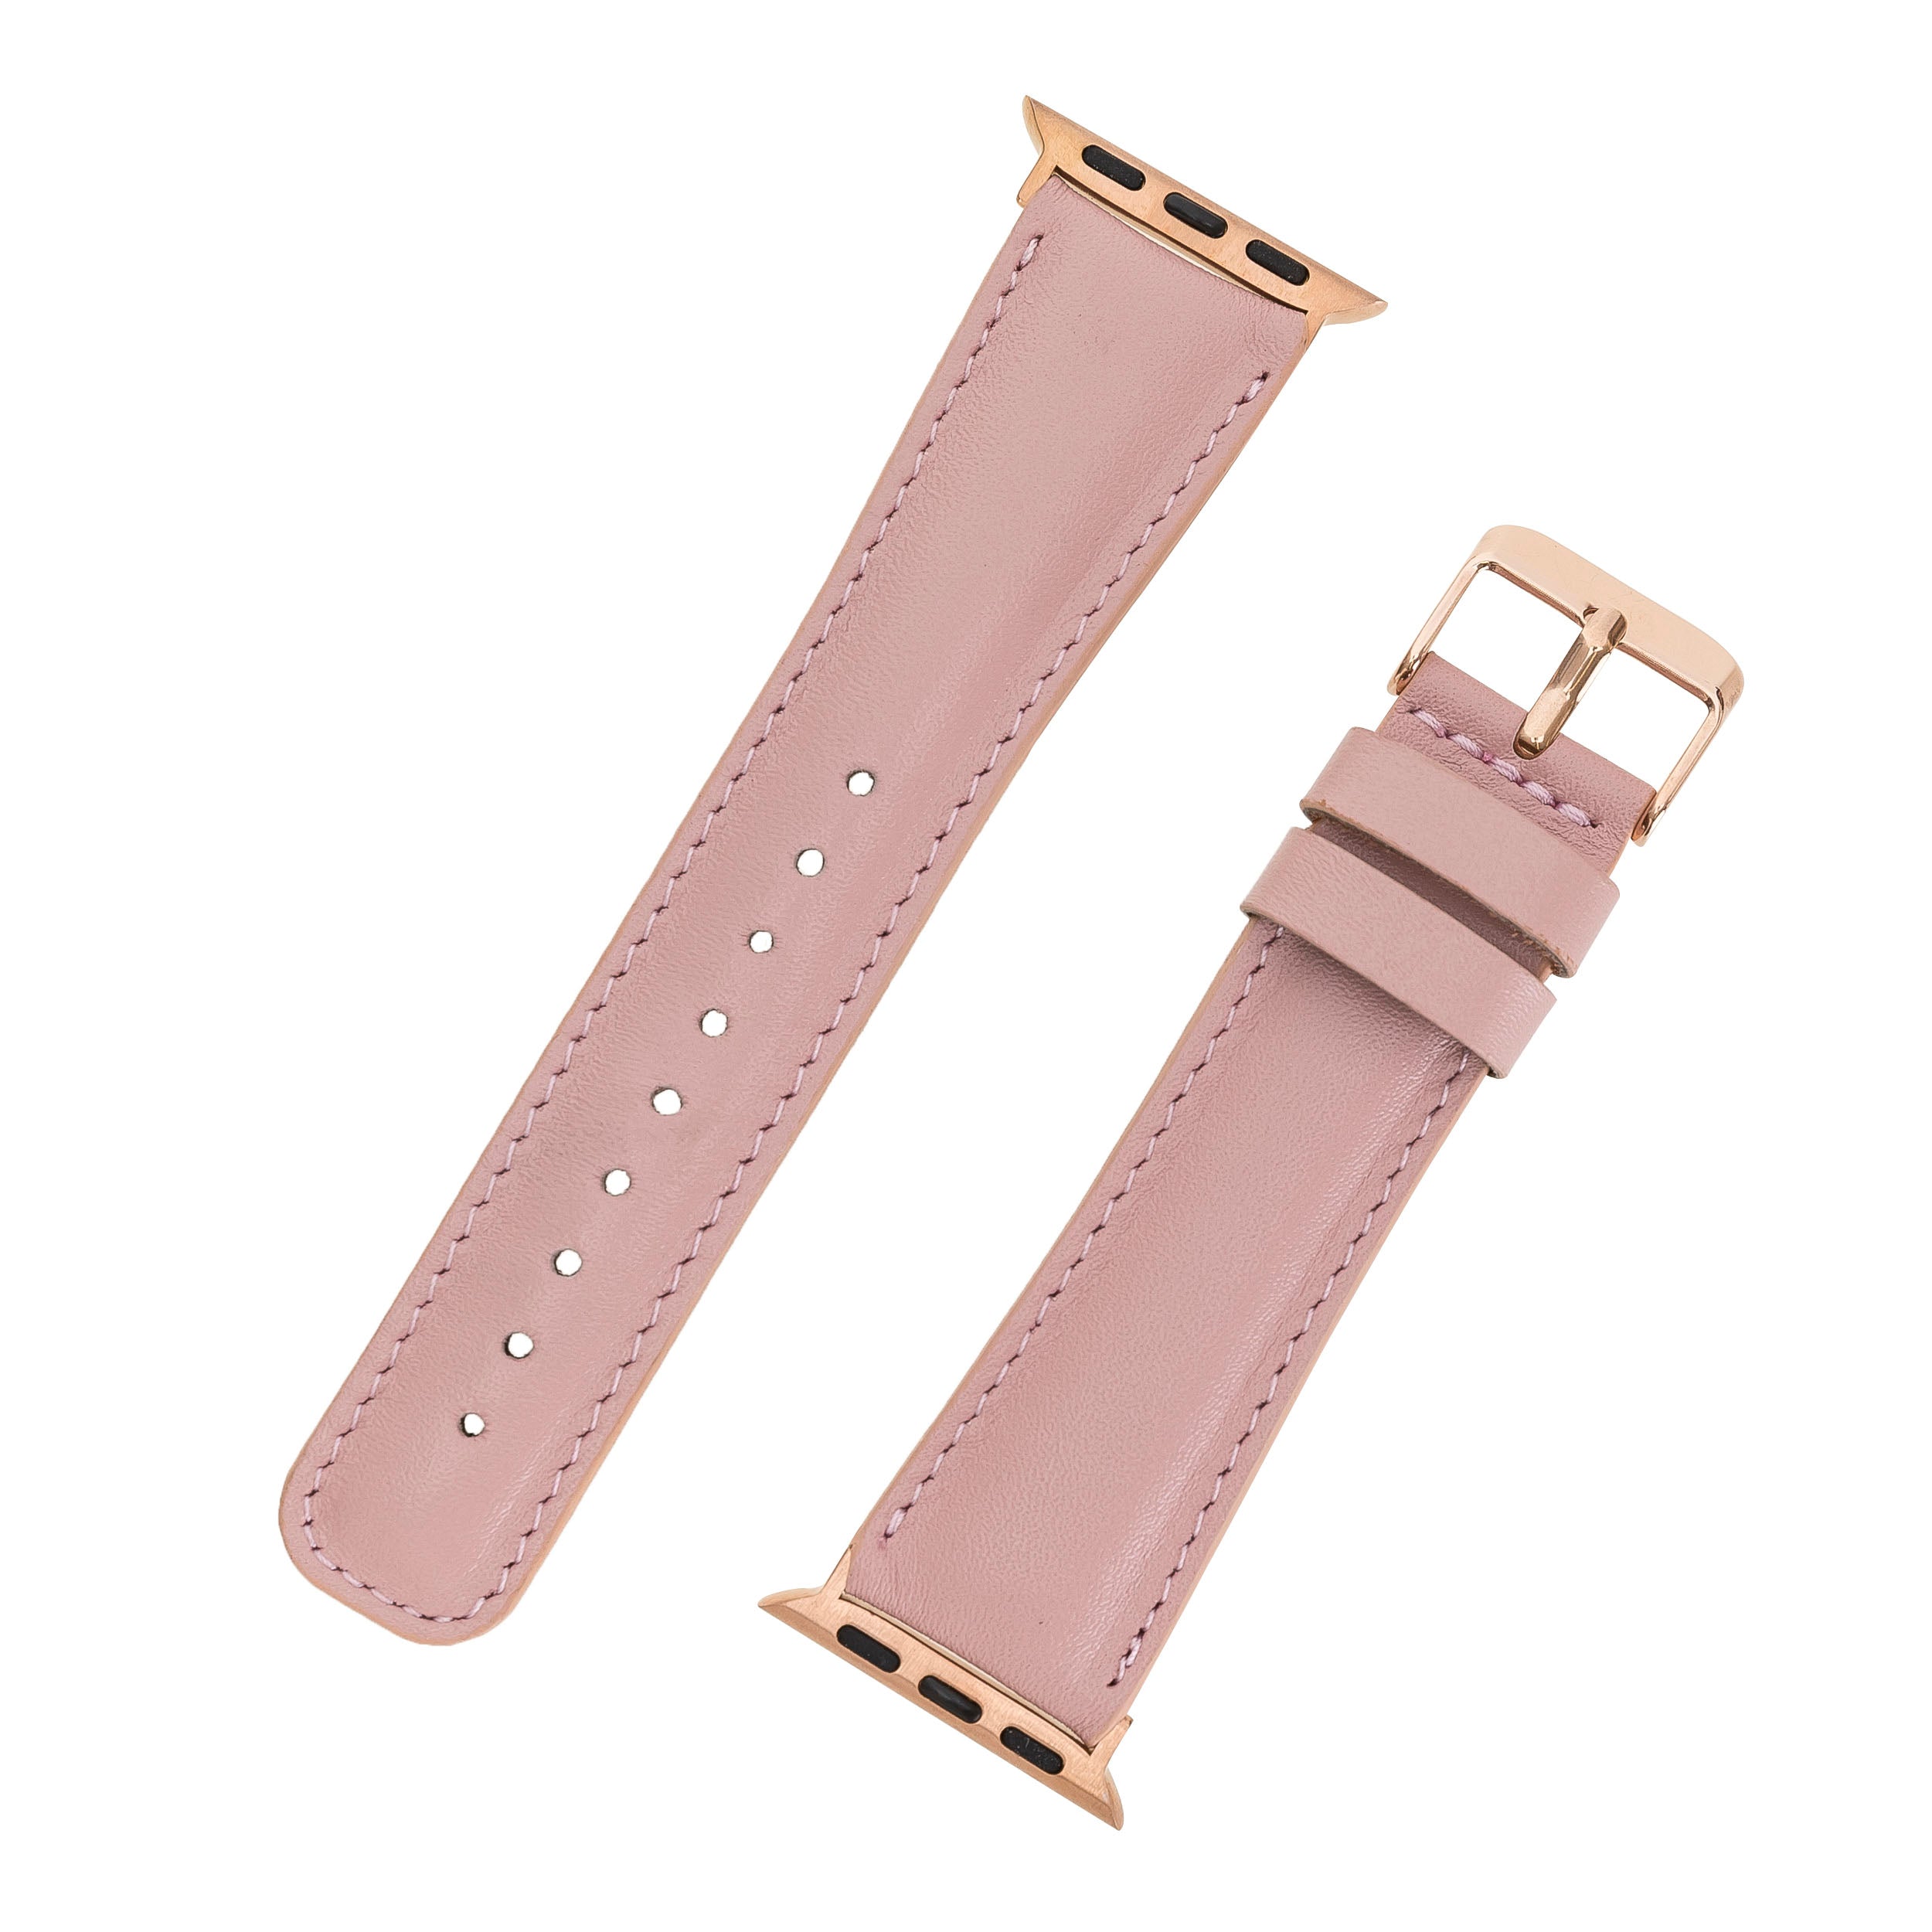 LupinnyLeather Liverpool Collection Leather Watch Band for Apple & Fitbit Versa Watch Band 13